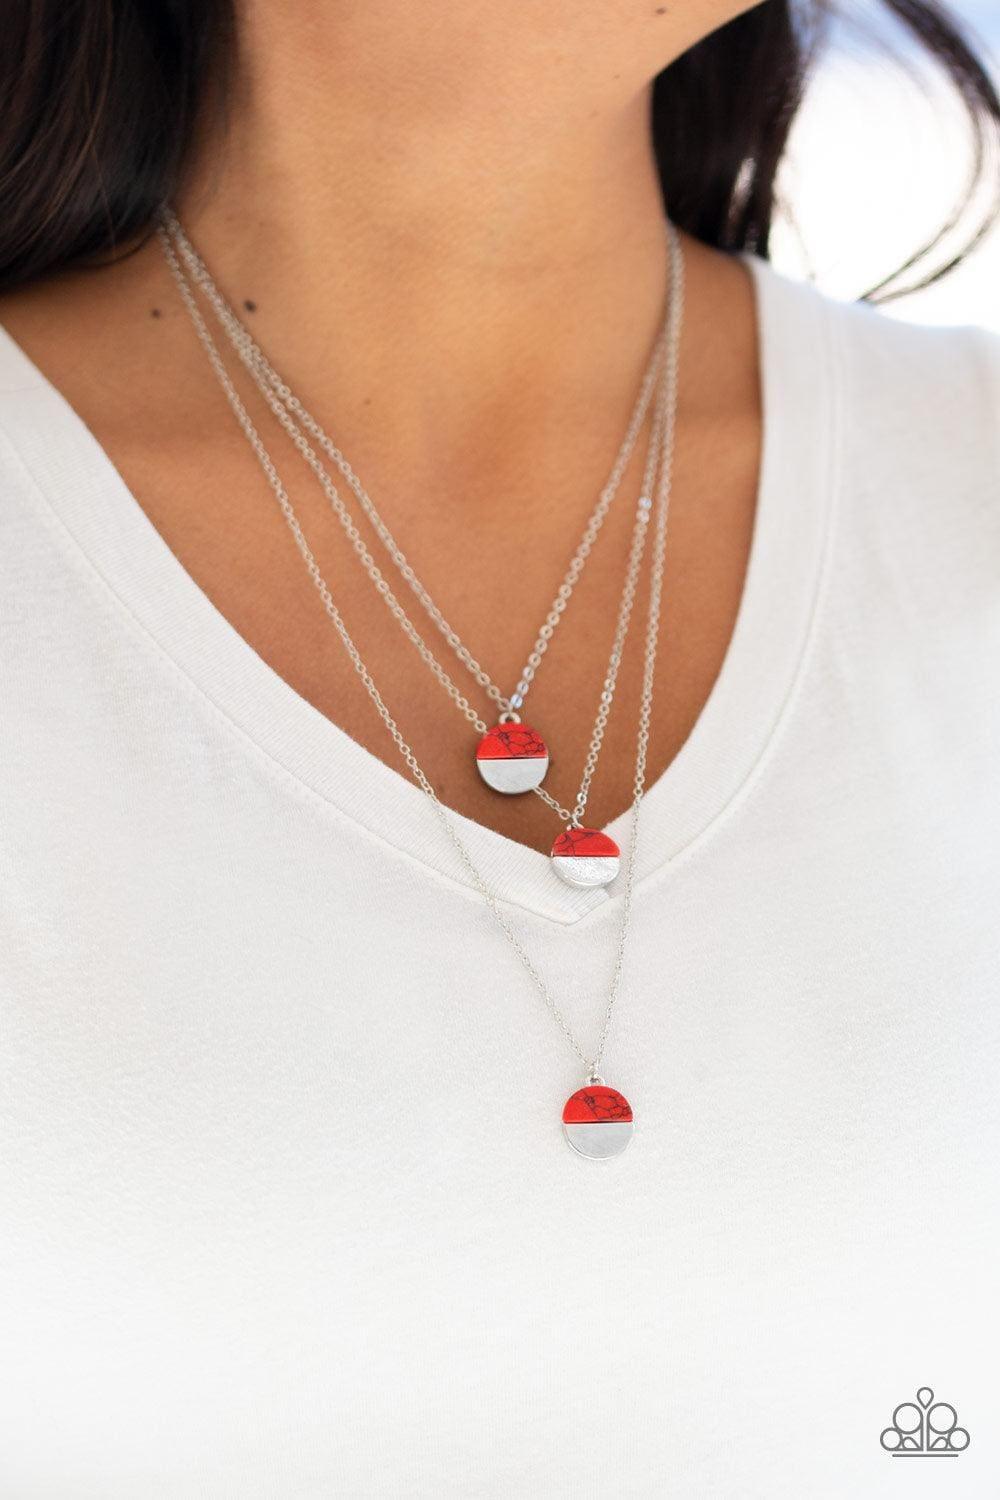 Paparazzi Accessories - Rural Reconstruction - Red Necklace - Bling by JessieK